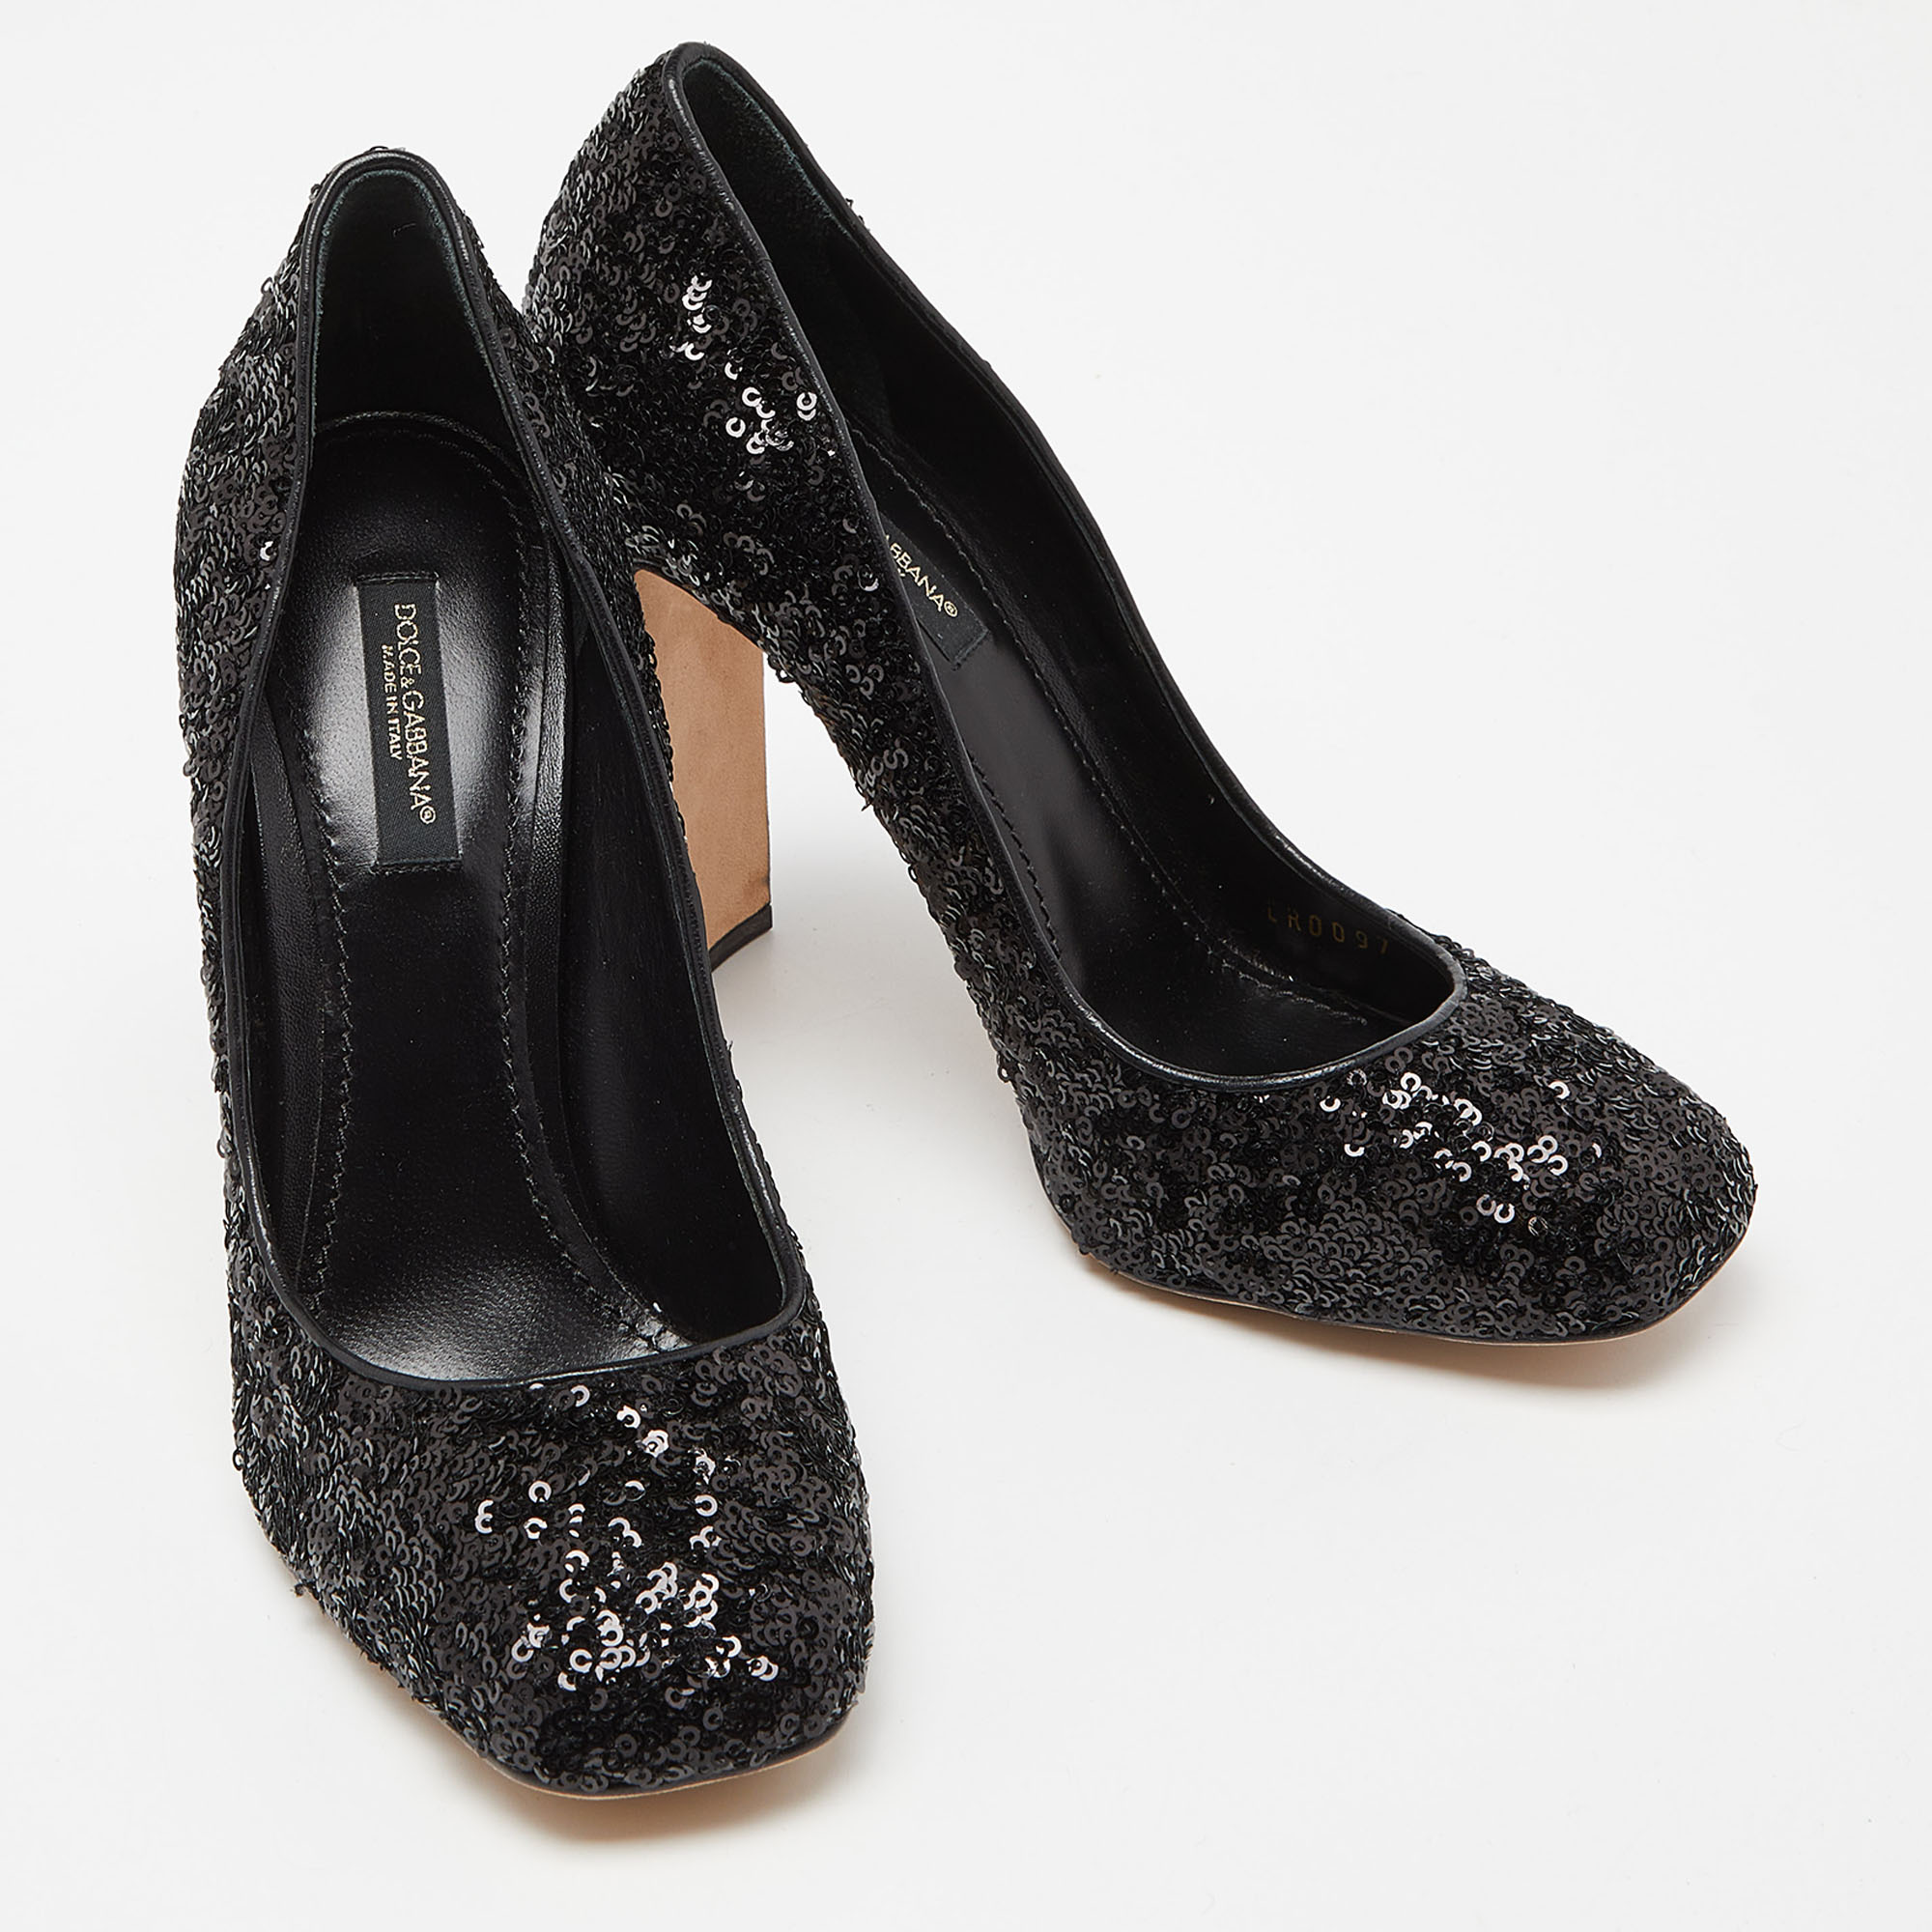 Dolce & Gabbana Black Sequins And Leather Block Heel Pumps Size 37.5